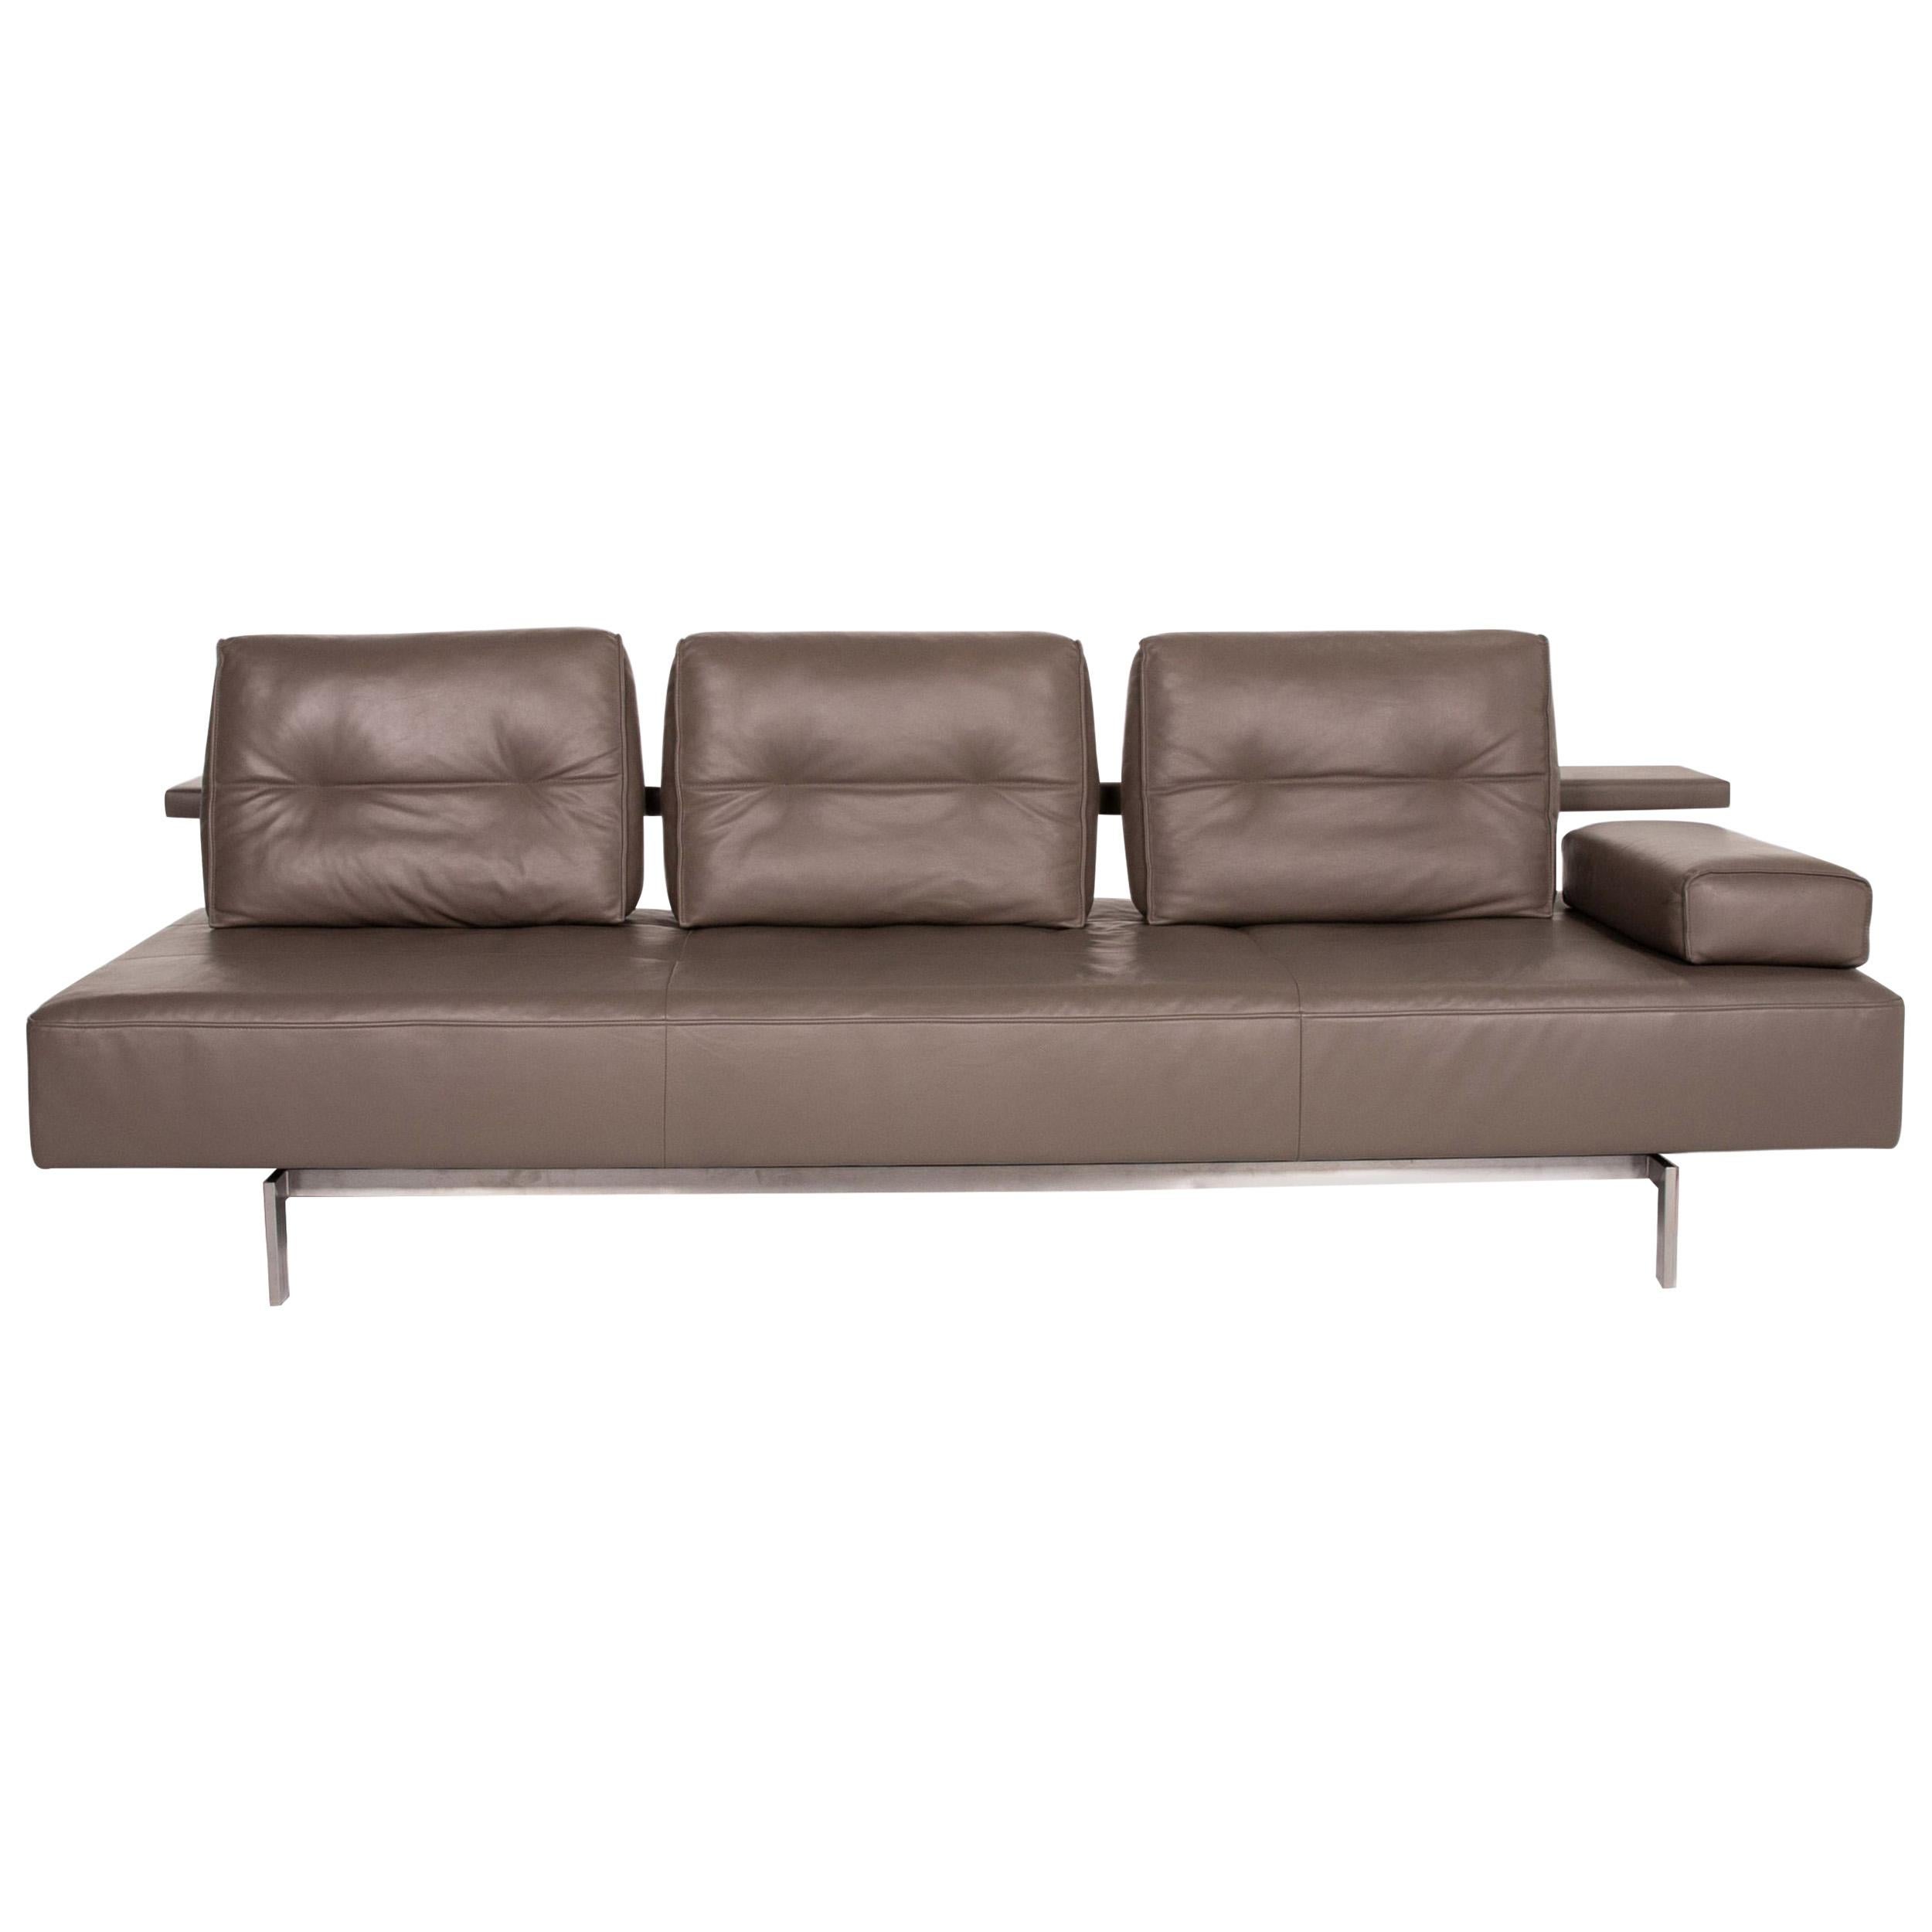 Rolf Benz Dono Leather Sofa Brown Three-Seat Couch For Sale